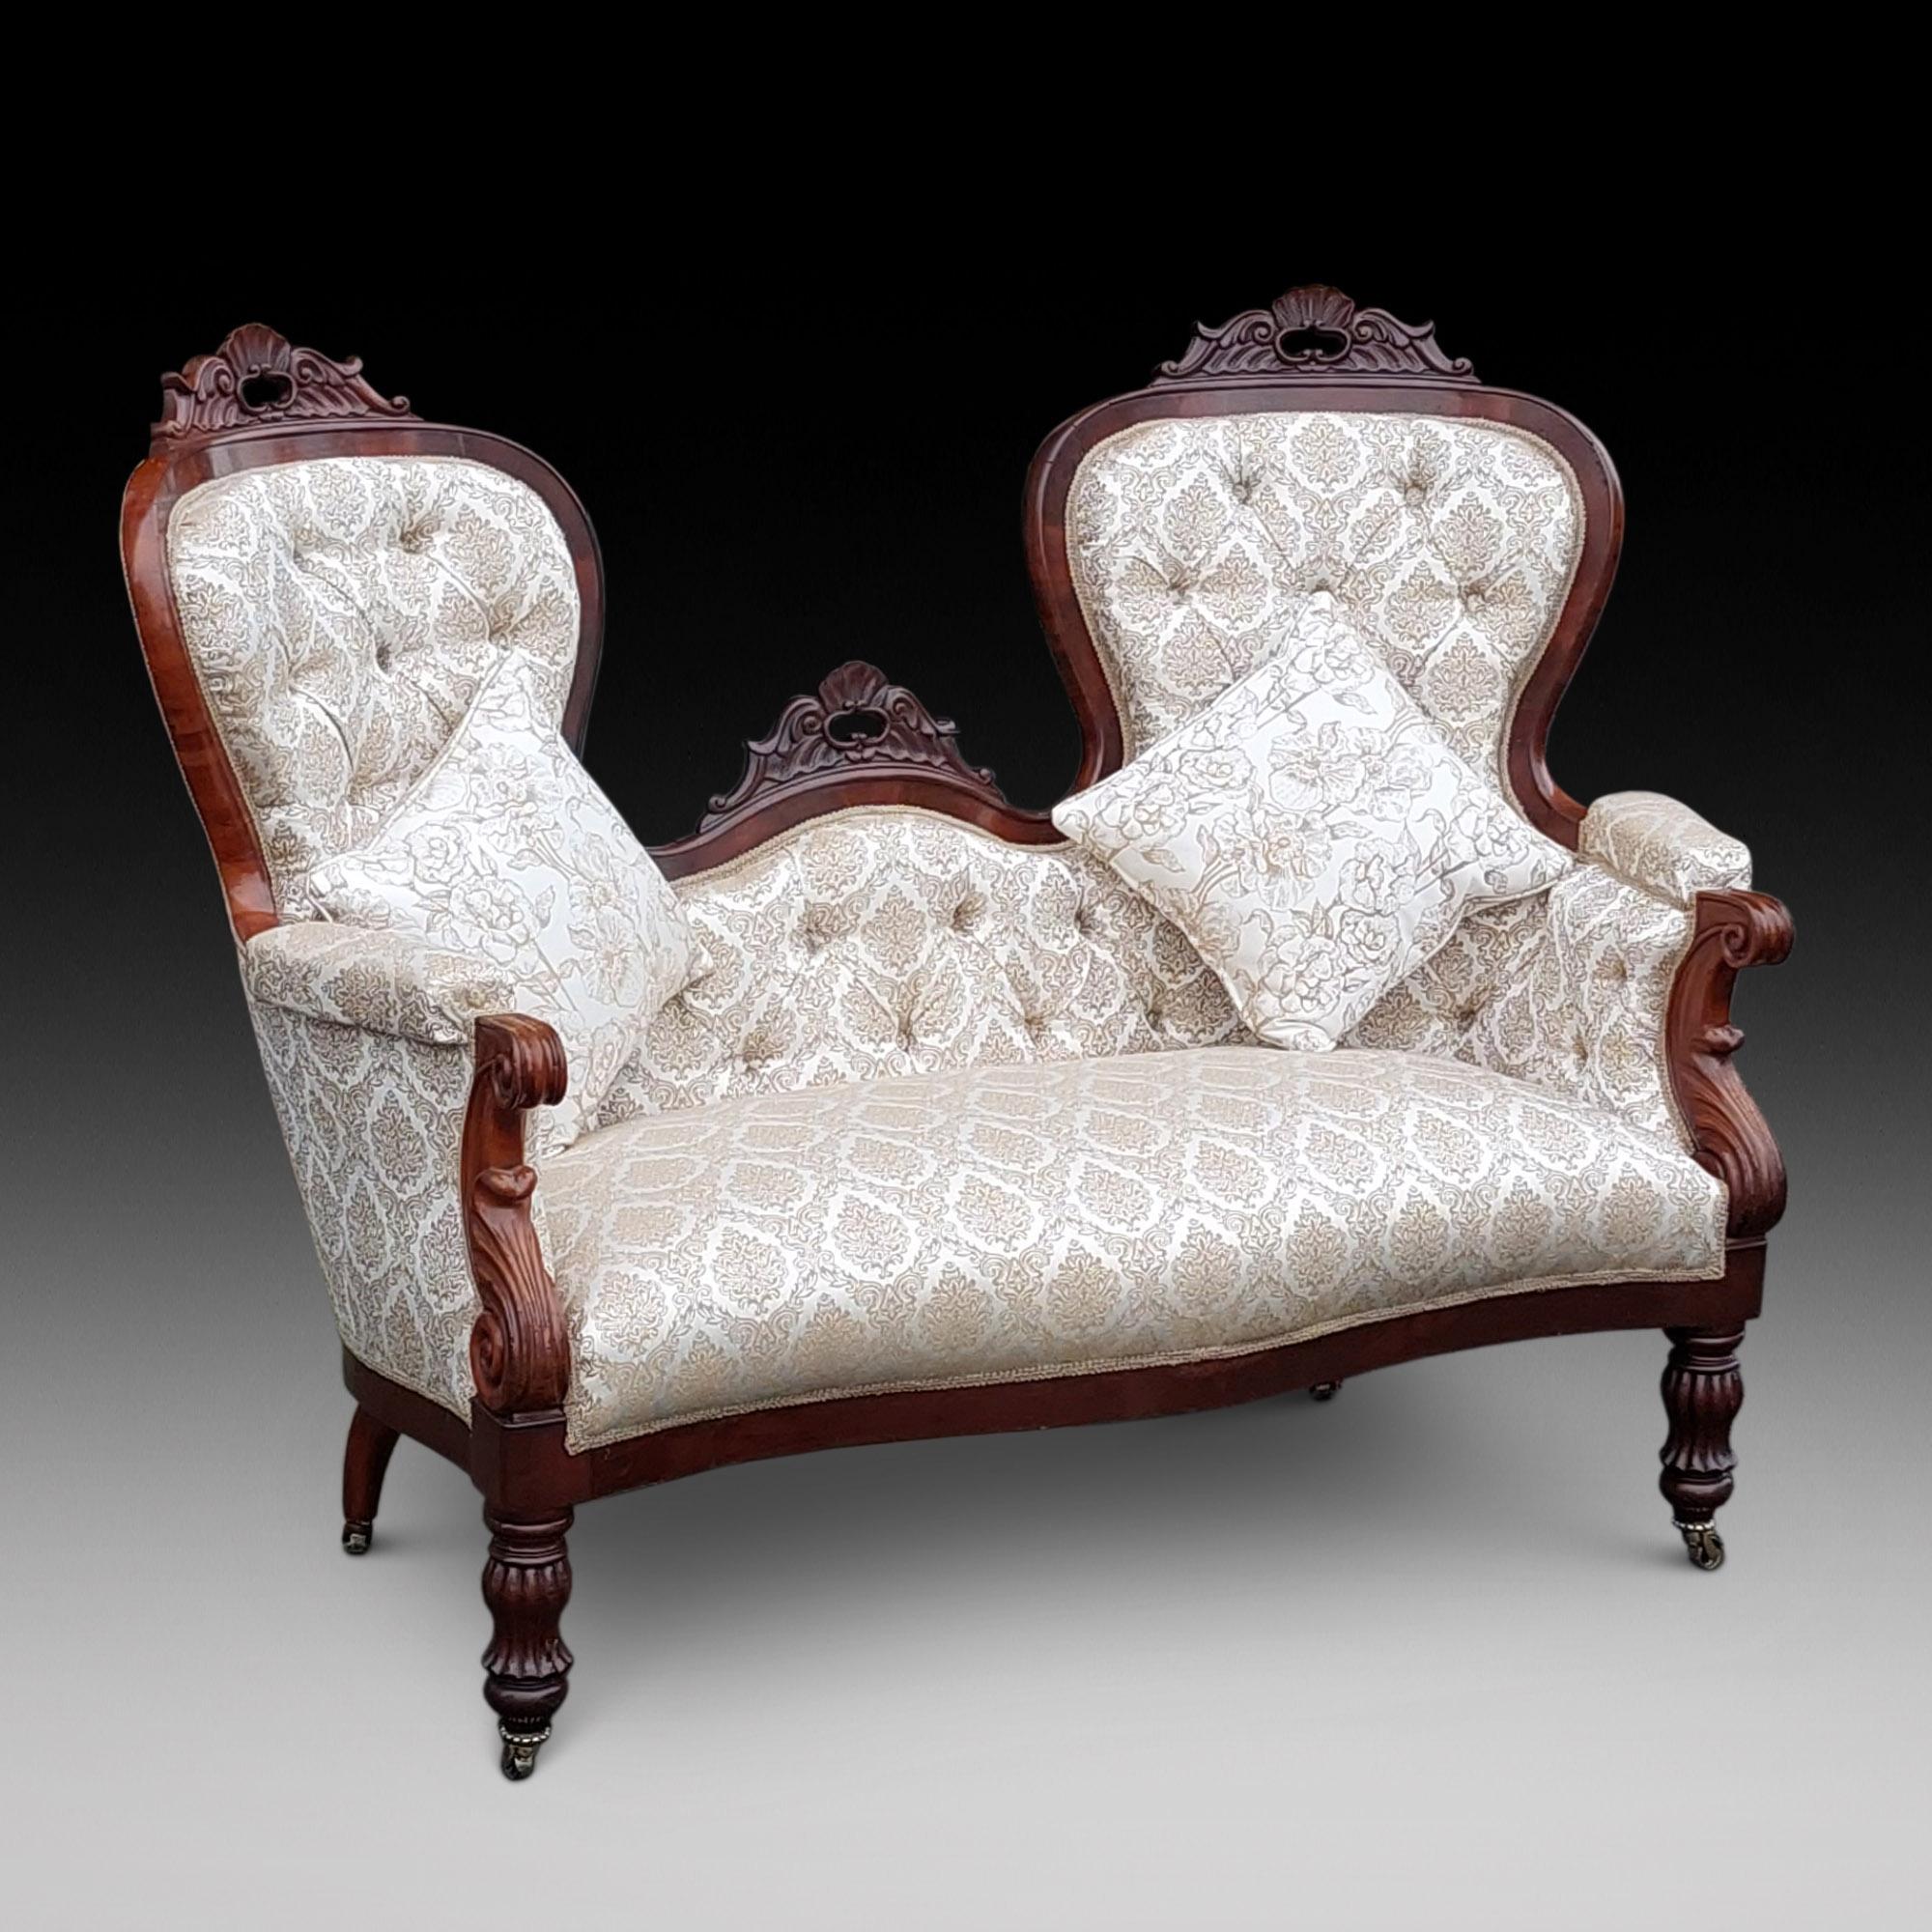 Pair of Flemish Mid 19thC Flame Mahogany Sofas with Reeded Leg of Biedermeier Influence - 60